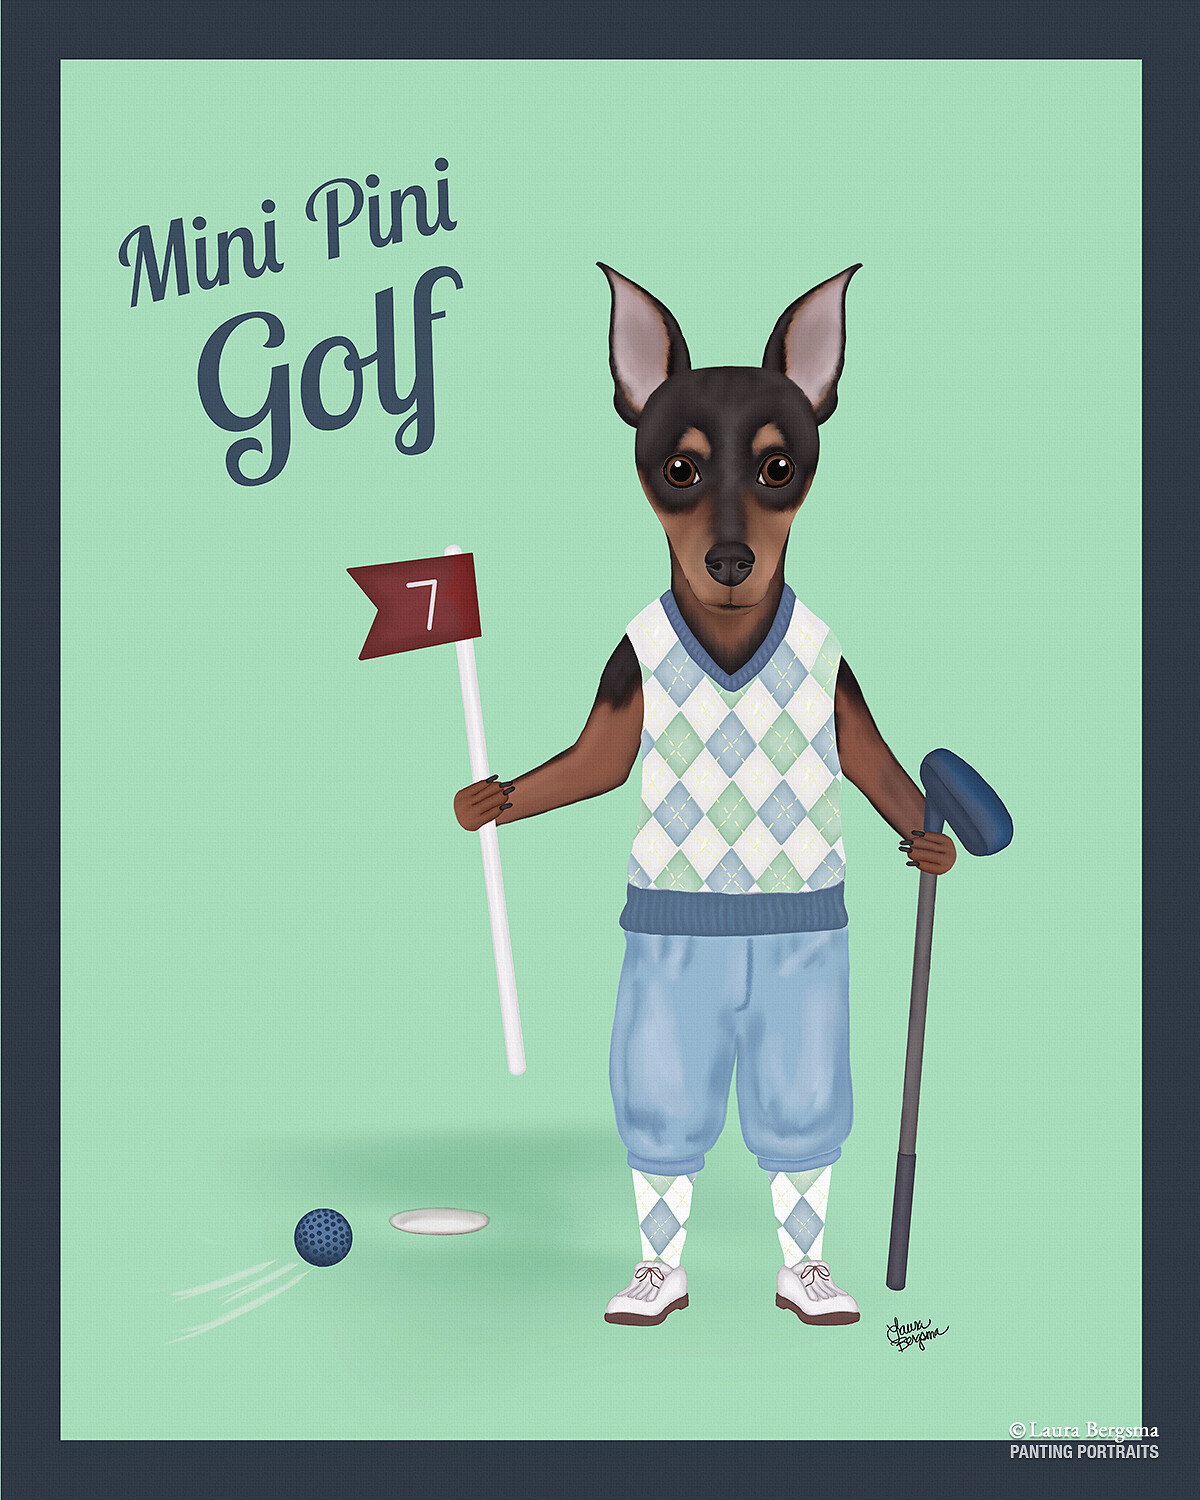 Min Pin playing the front 9 on a little golf course.